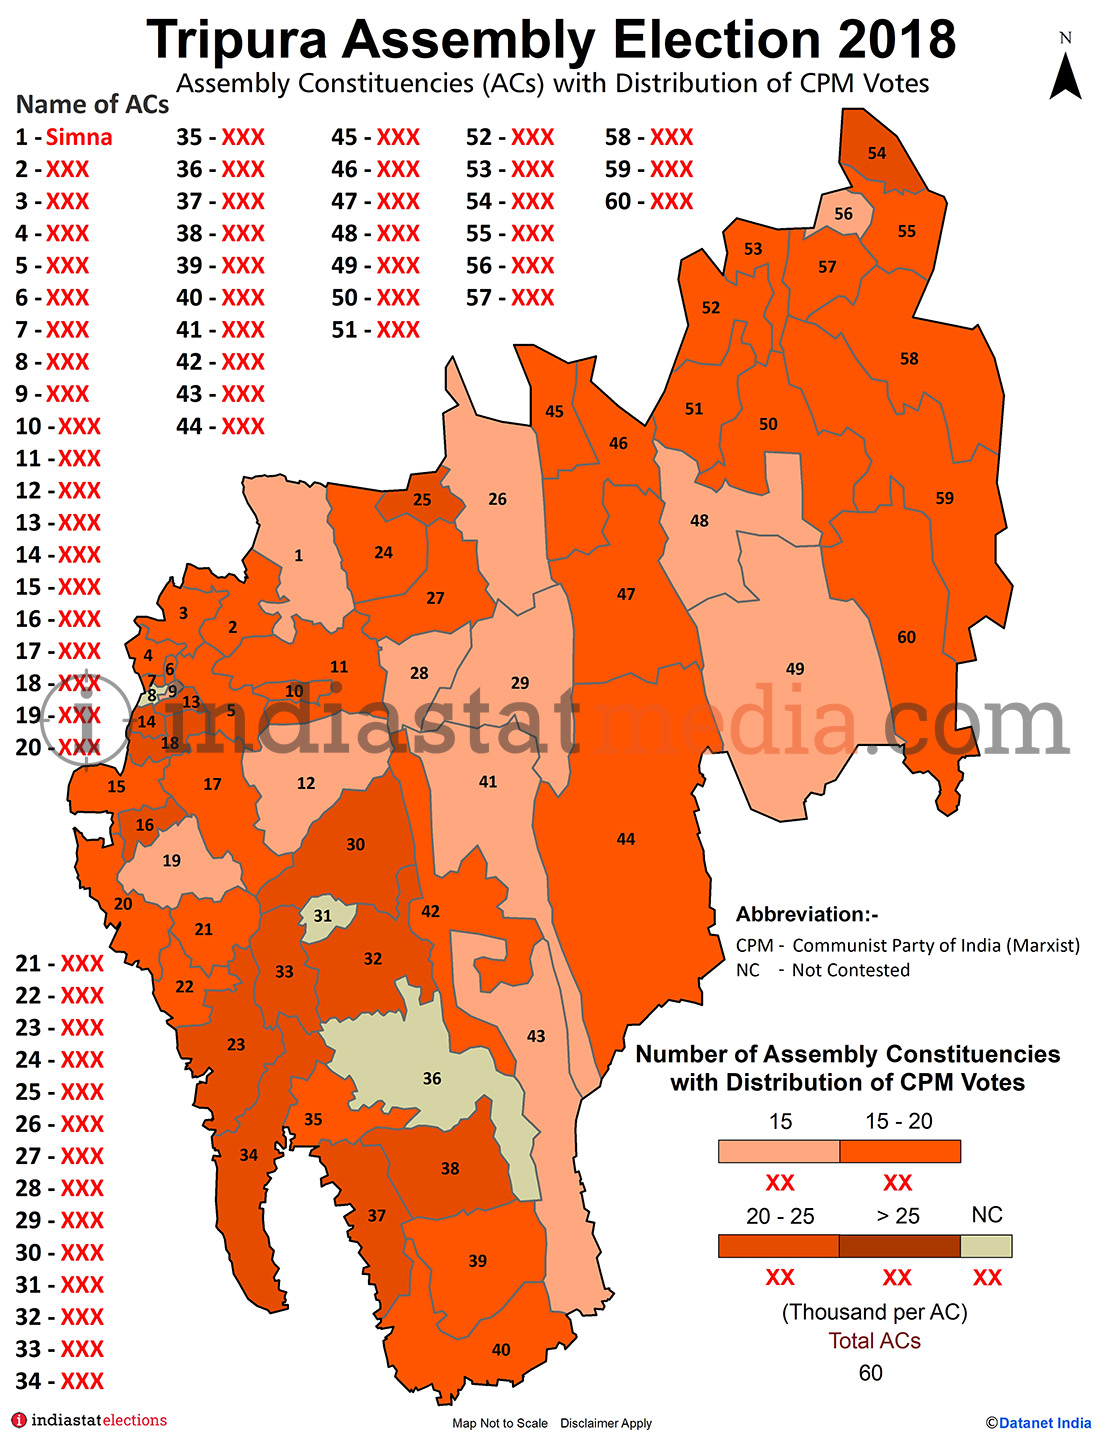 Distribution of CPM Votes by Constituencies in Tripura (Assembly Election - 2018)